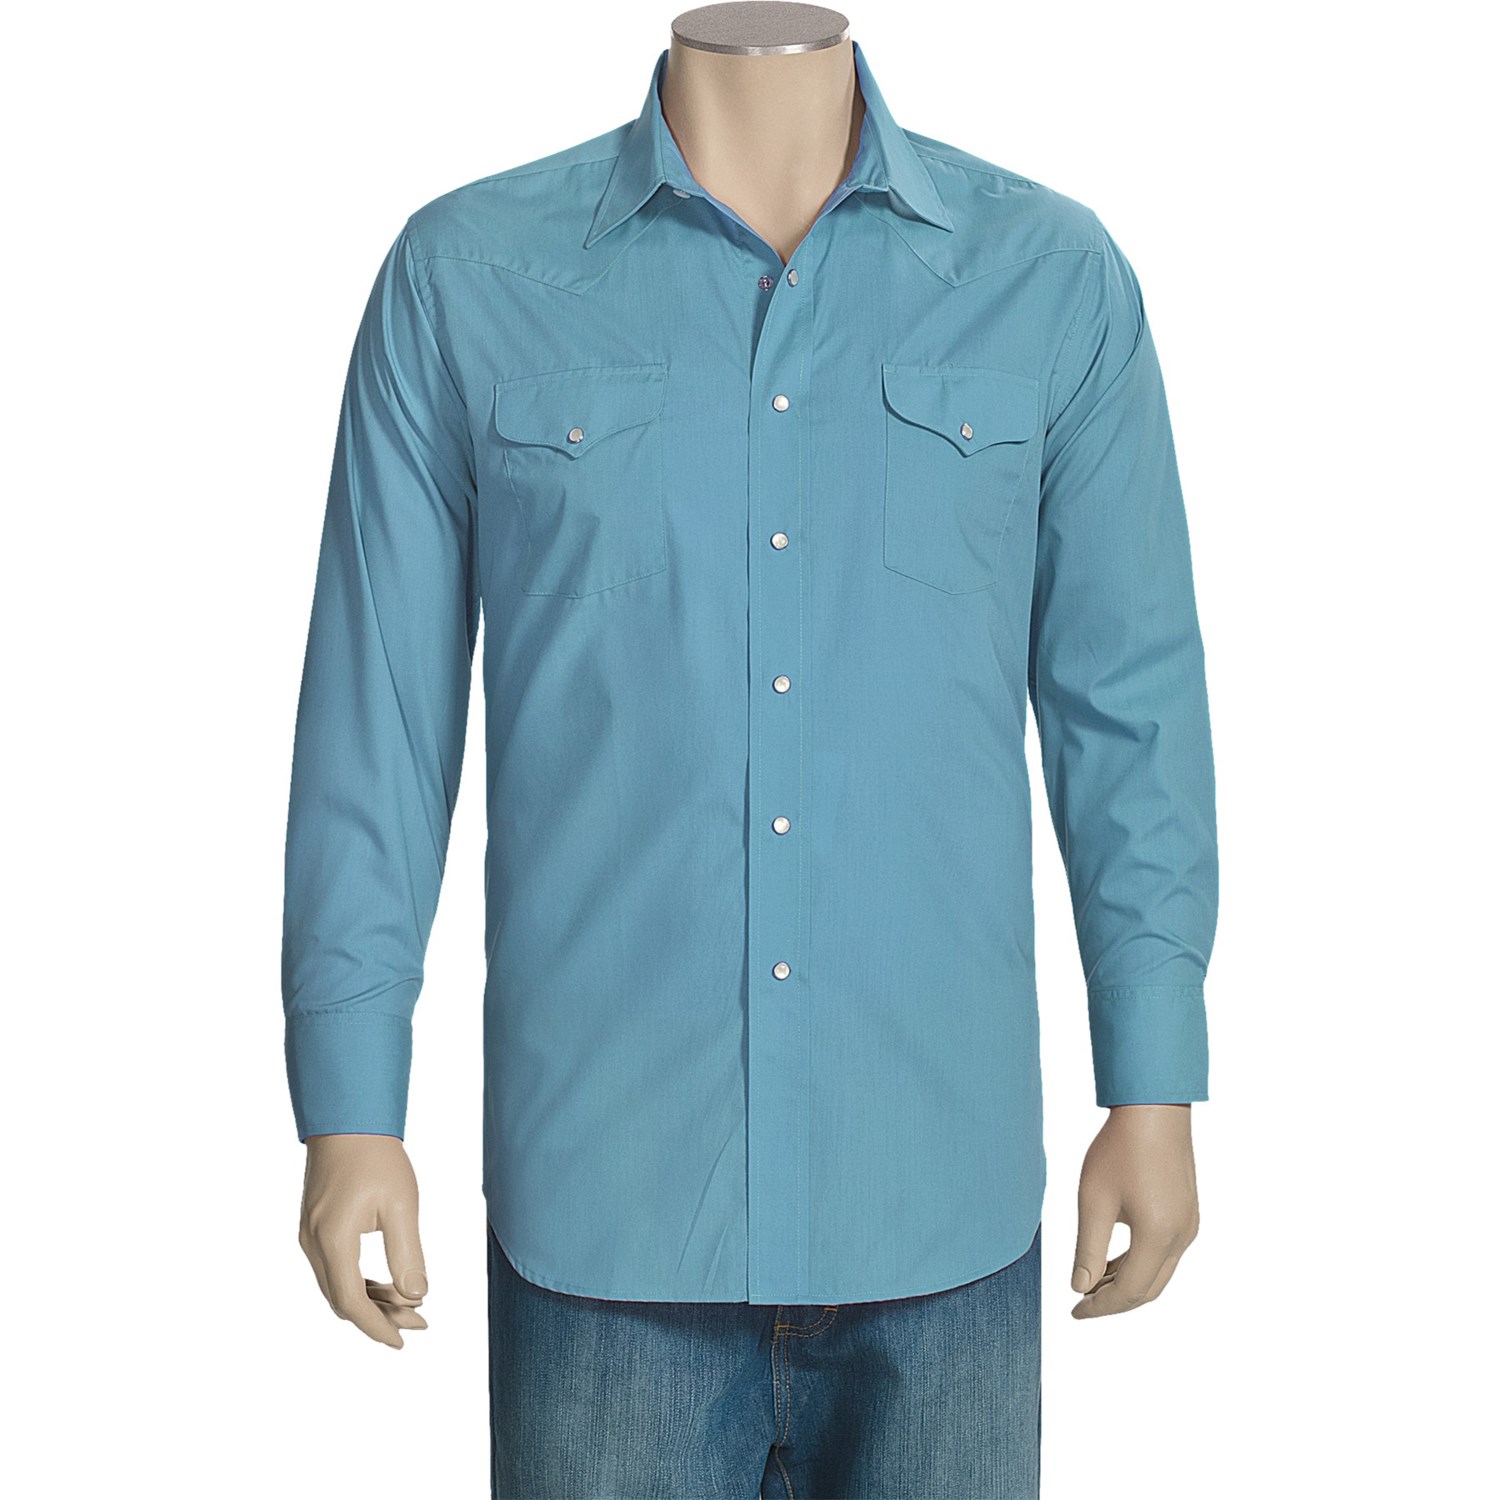 Panhandle Slim Solid Snap Shirt (For Men) 4601T - Save 93%